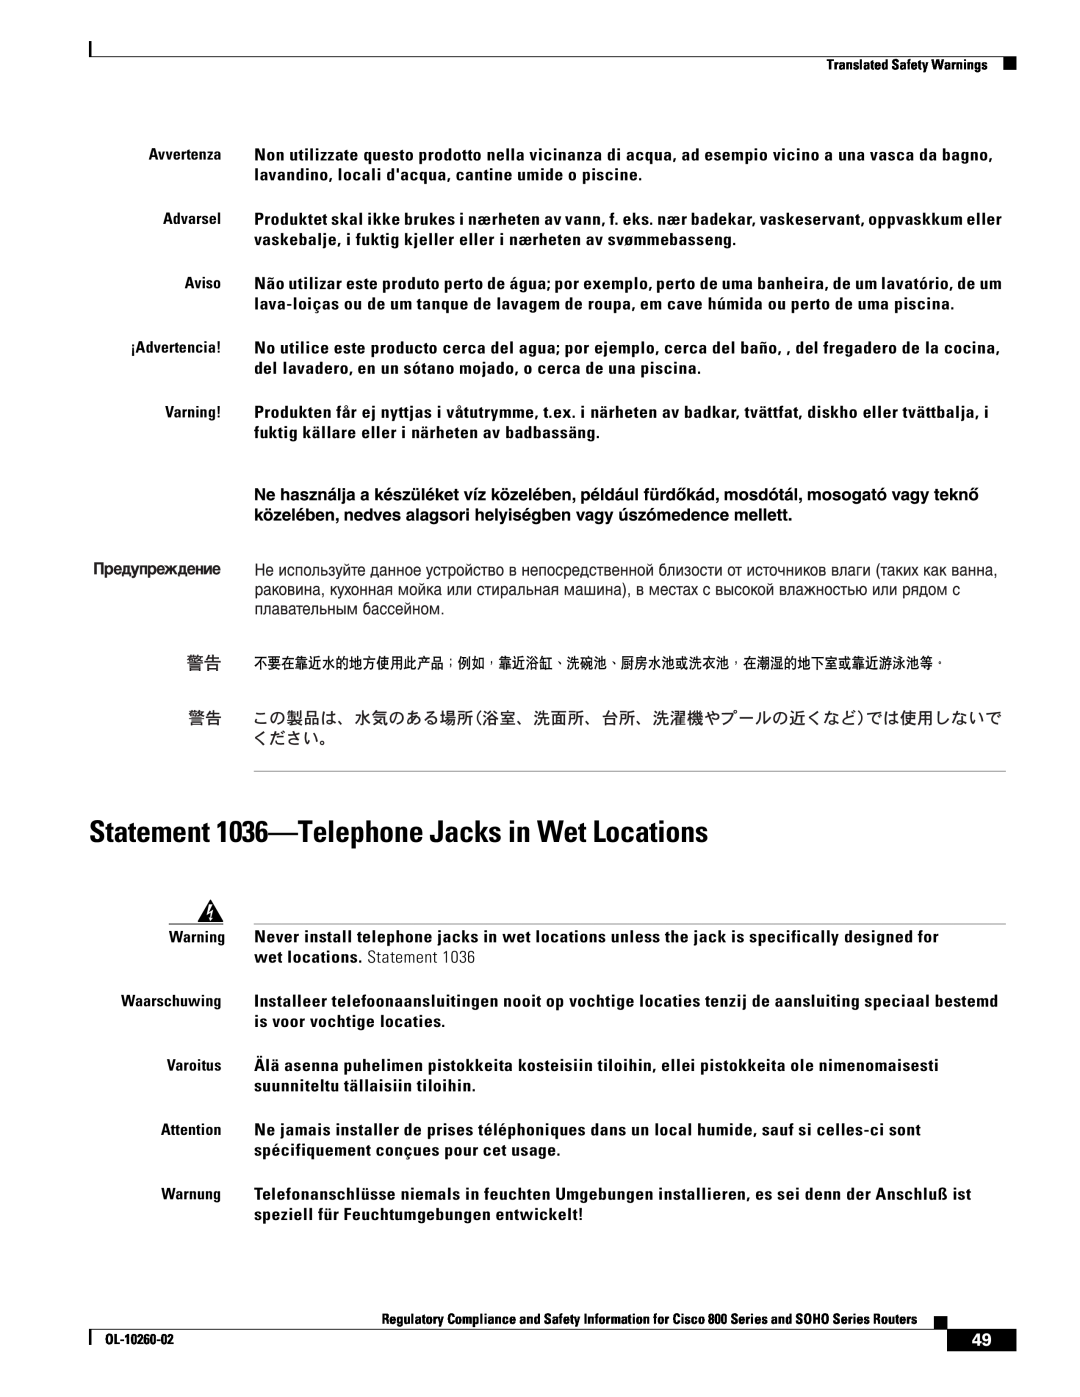 Cisco Systems SOHO Series manual Statement 1036-Telephone Jacks in Wet Locations 